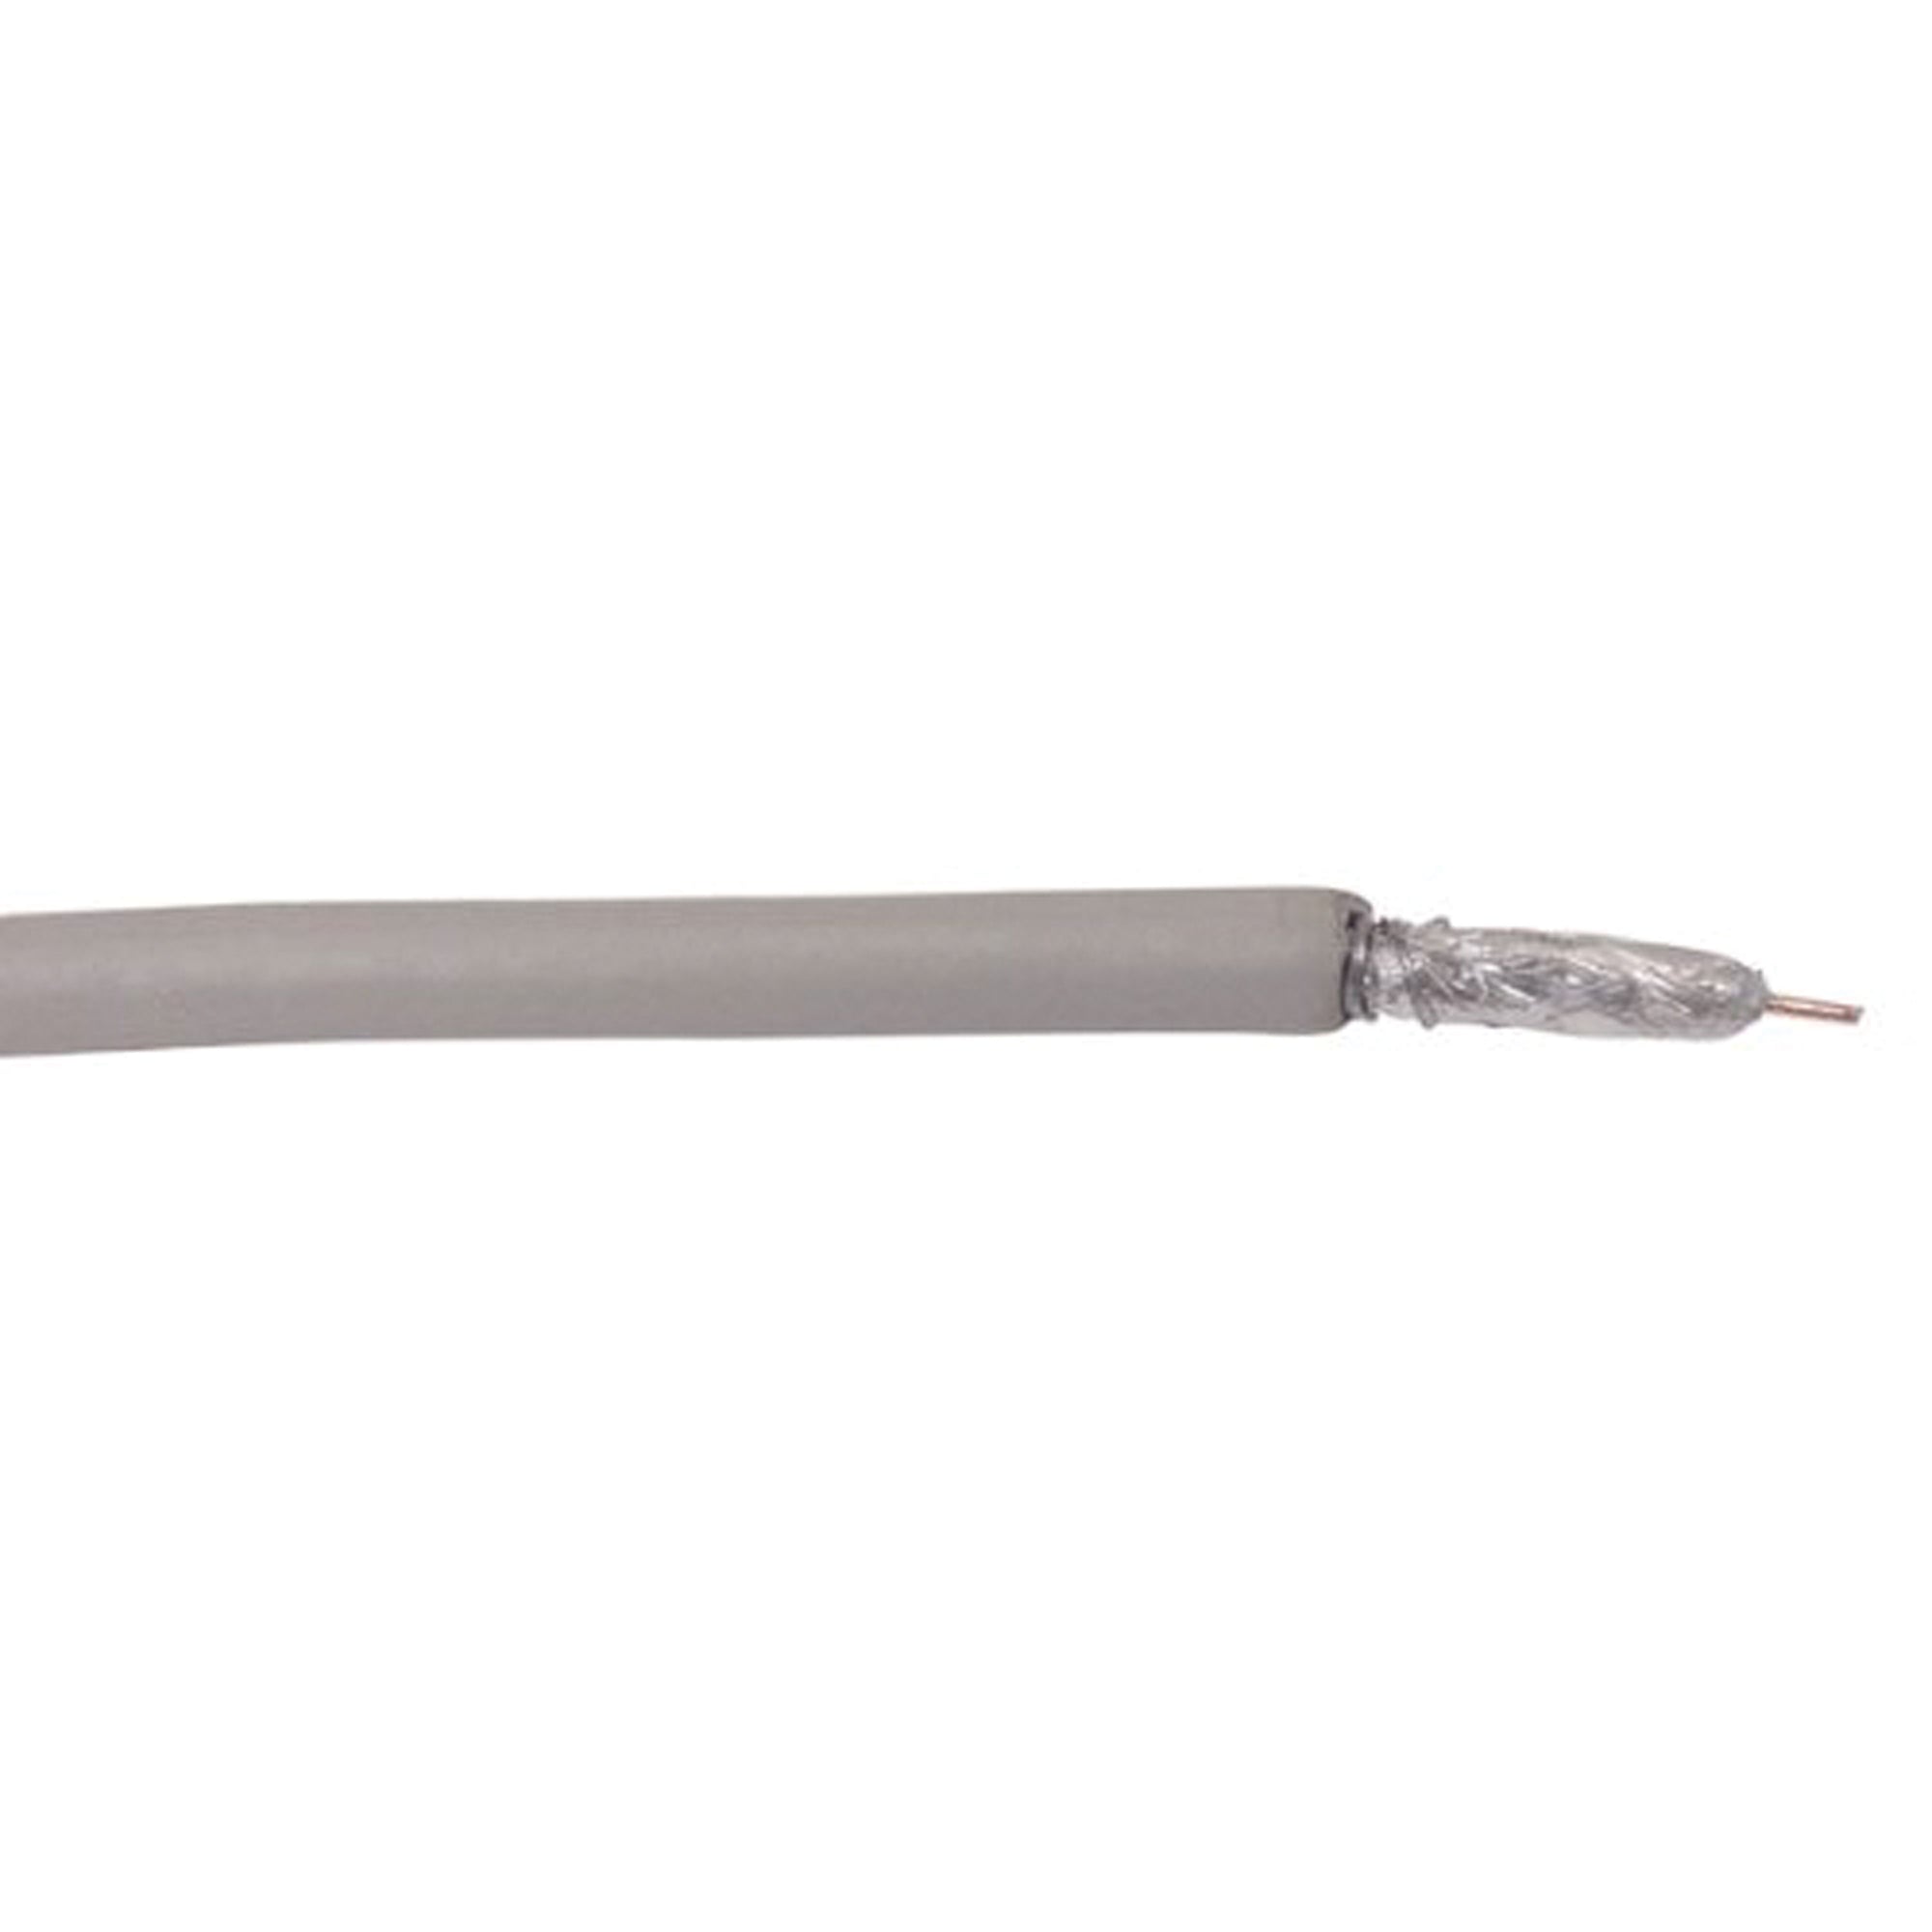 Winegard CL-0260 75 ohm Coaxial Cable